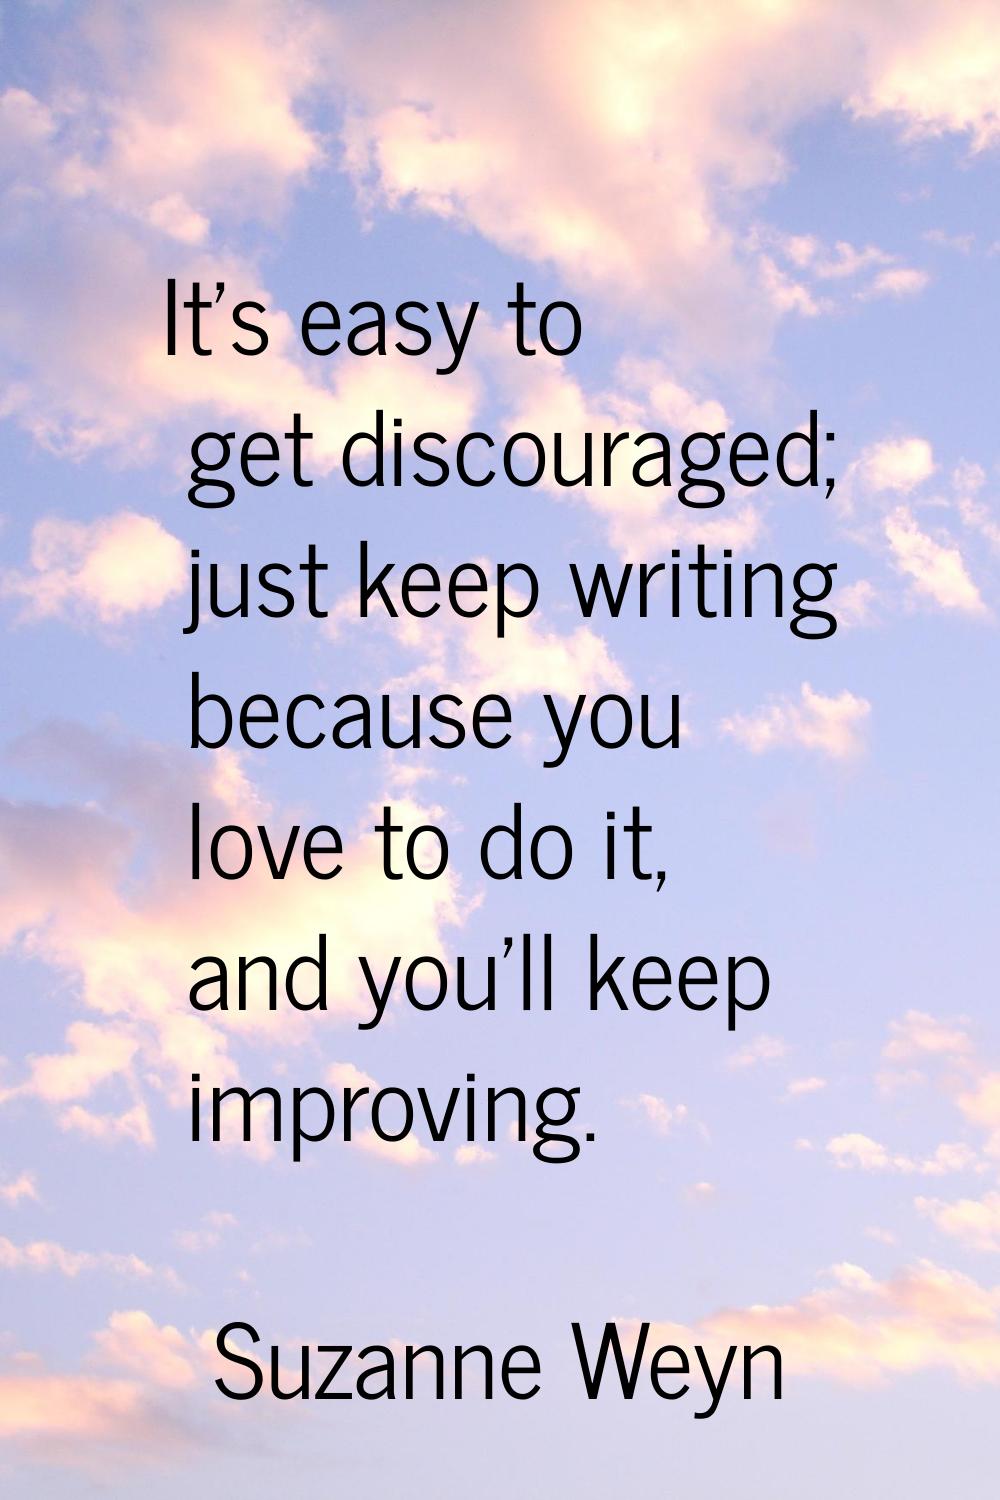 It's easy to get discouraged; just keep writing because you love to do it, and you'll keep improvin